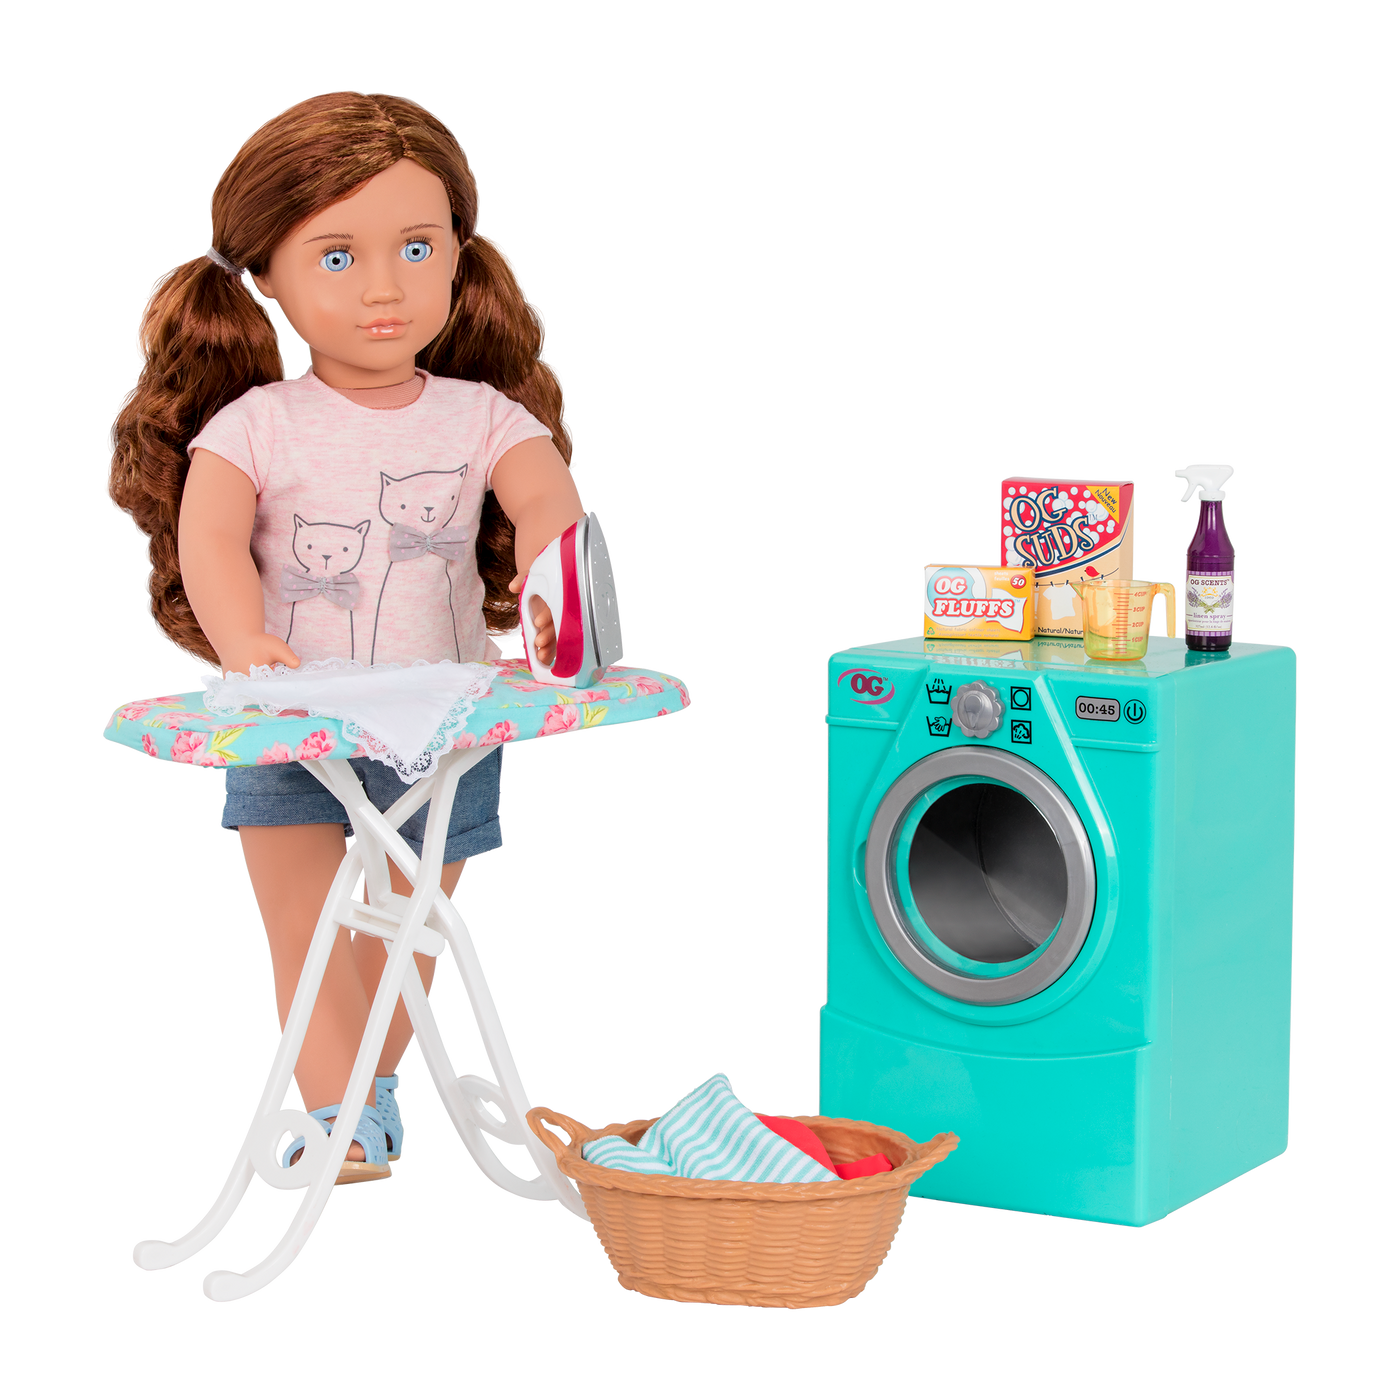 My Life As 6pc BLUE 18 Doll WASHER+DRYER Laundry Room Set